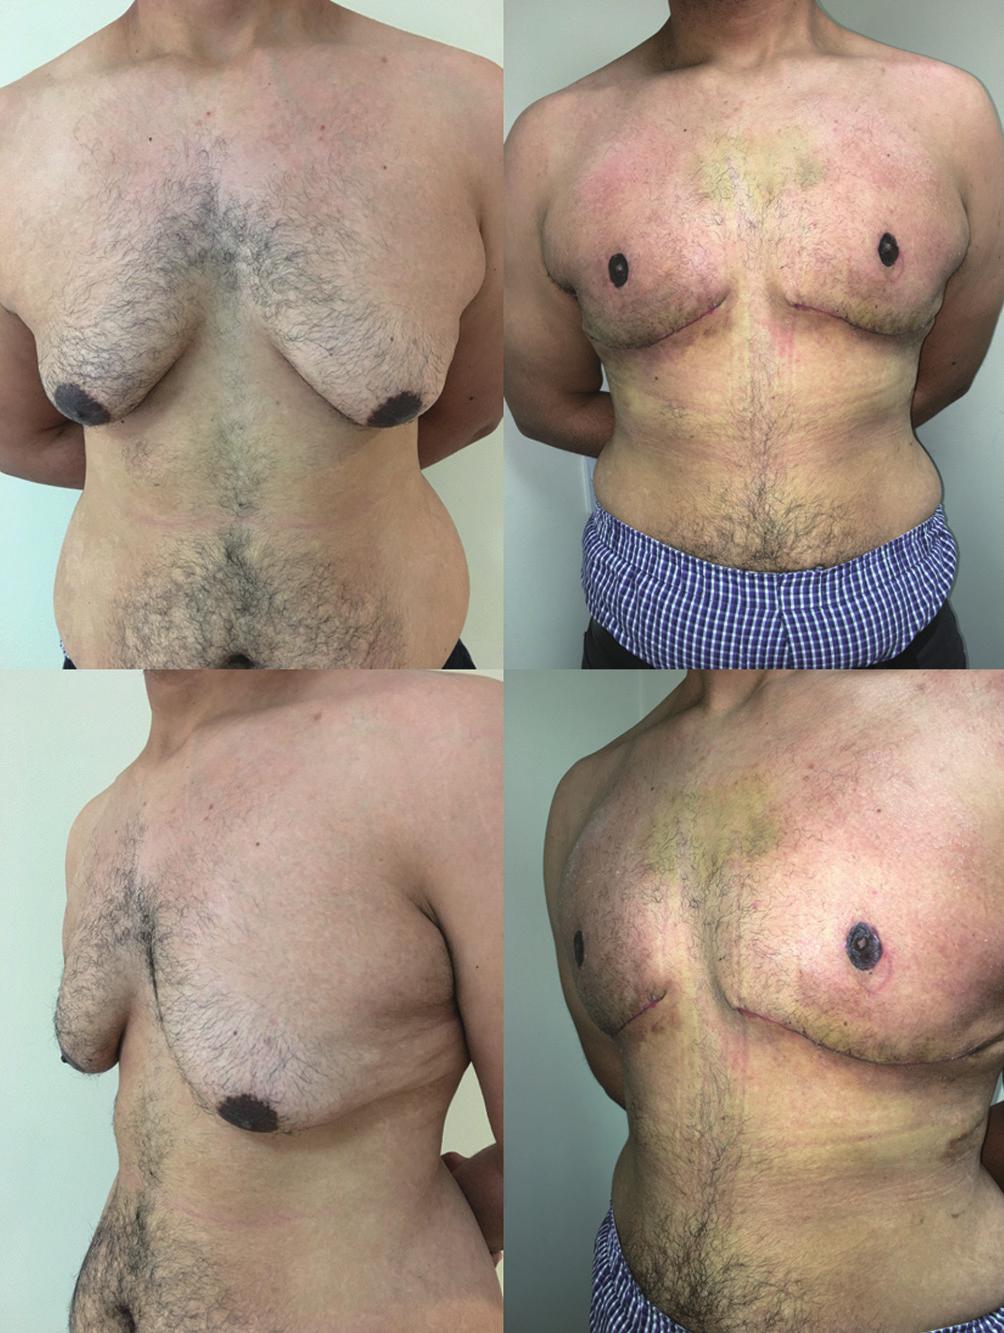 He underwent correction of bilateral gynaecomastia entailing liposuction, open glandular excision and nipple transposition using the Lalonde technique, shown preoperatively (left) and postoperatively